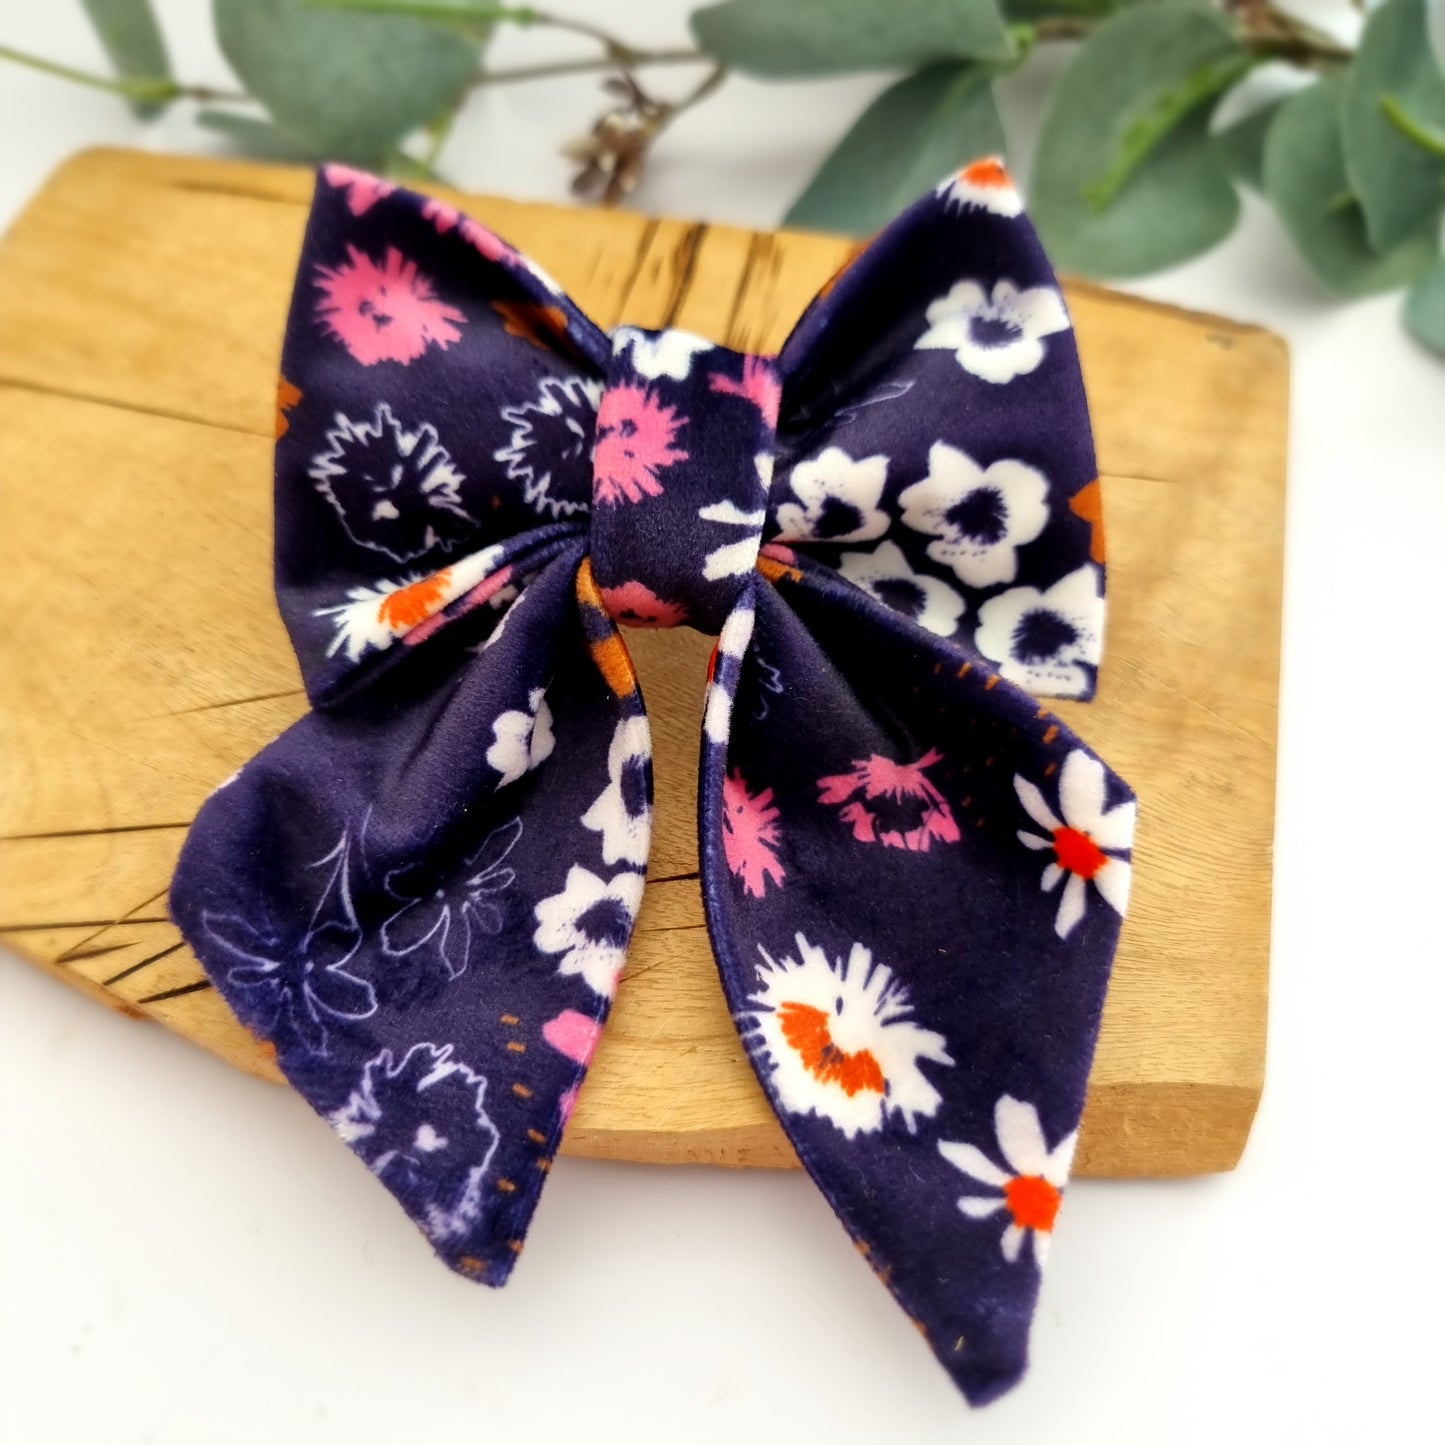 Lola Floral dog bow tie